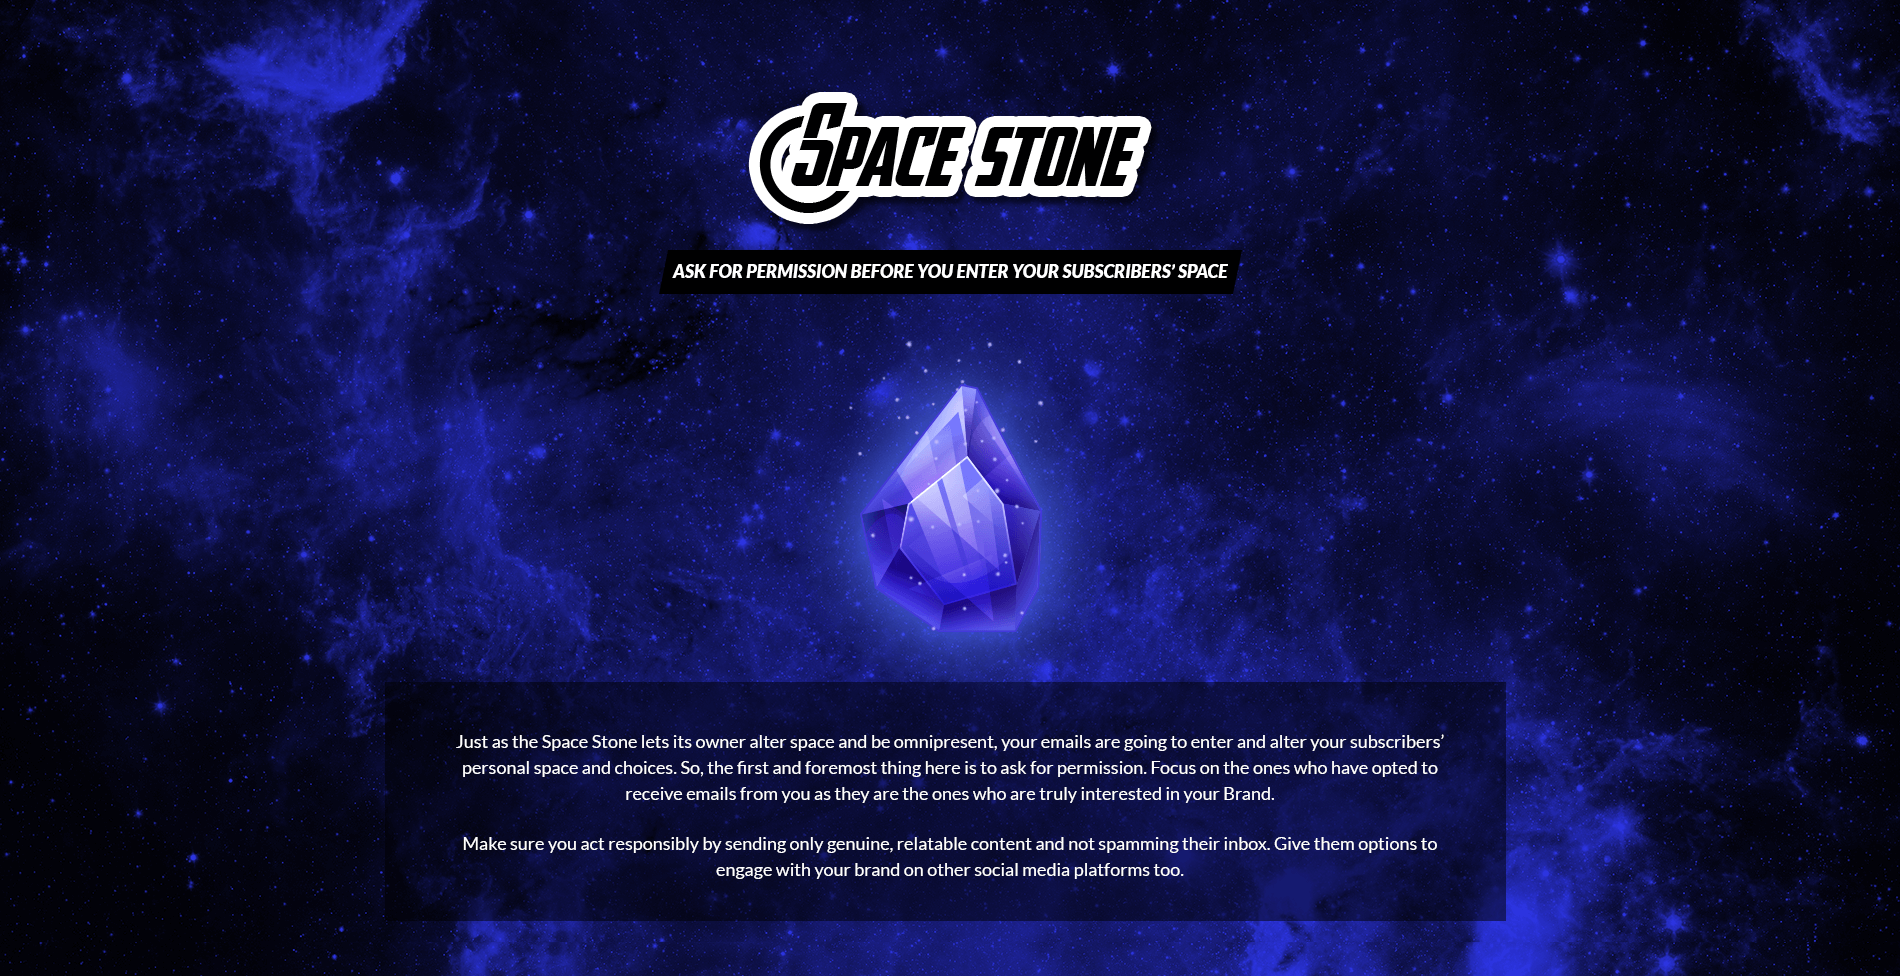 Space Stone - Ask for Permission Before You Enter your Subscribers’ Space
Just as the Space Stone lets its owner alter space and be omnipresent, your emails are going to enter and alter your subscribers’ personal space and choices. So, the first and foremost thing here is to ask for permission. Focus on the ones who have opted to receive emails from you as they are the ones who are truly interested in your Brand. Make sure you act responsibly by sending only genuine, relatable content and not spamming their inbox. Give them options to engage with your brand on other social media platforms too.